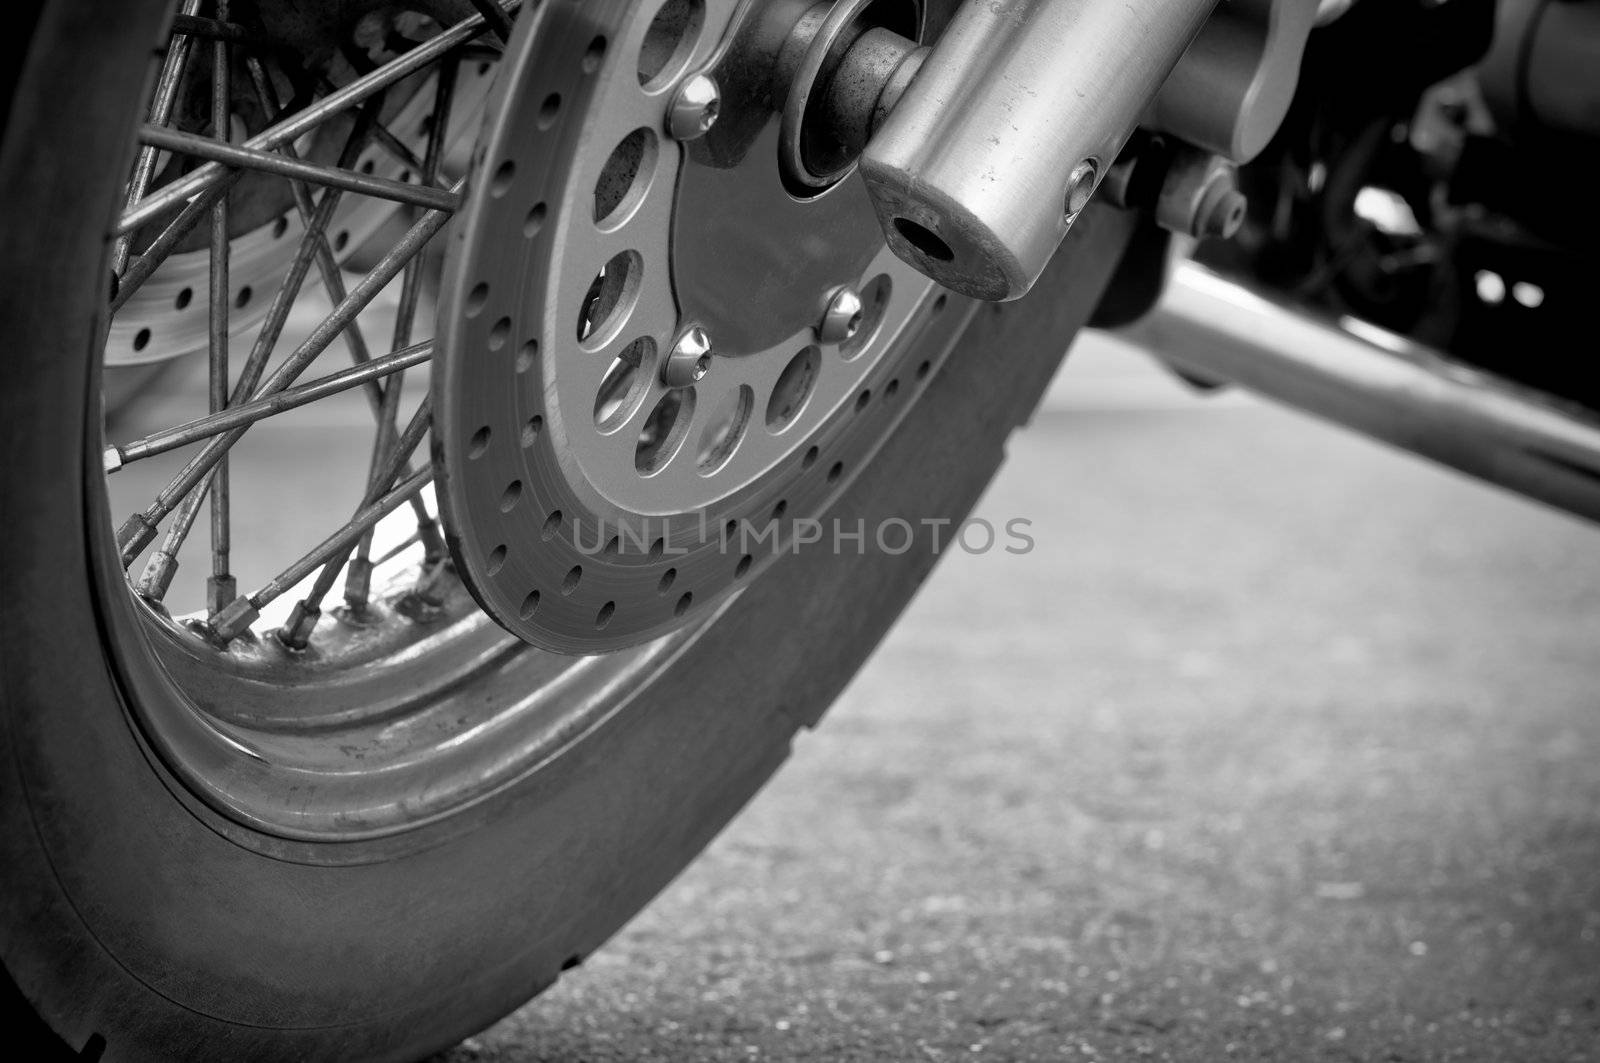 Wheel motorcycle close up, black and white photography. Llow point shooting.